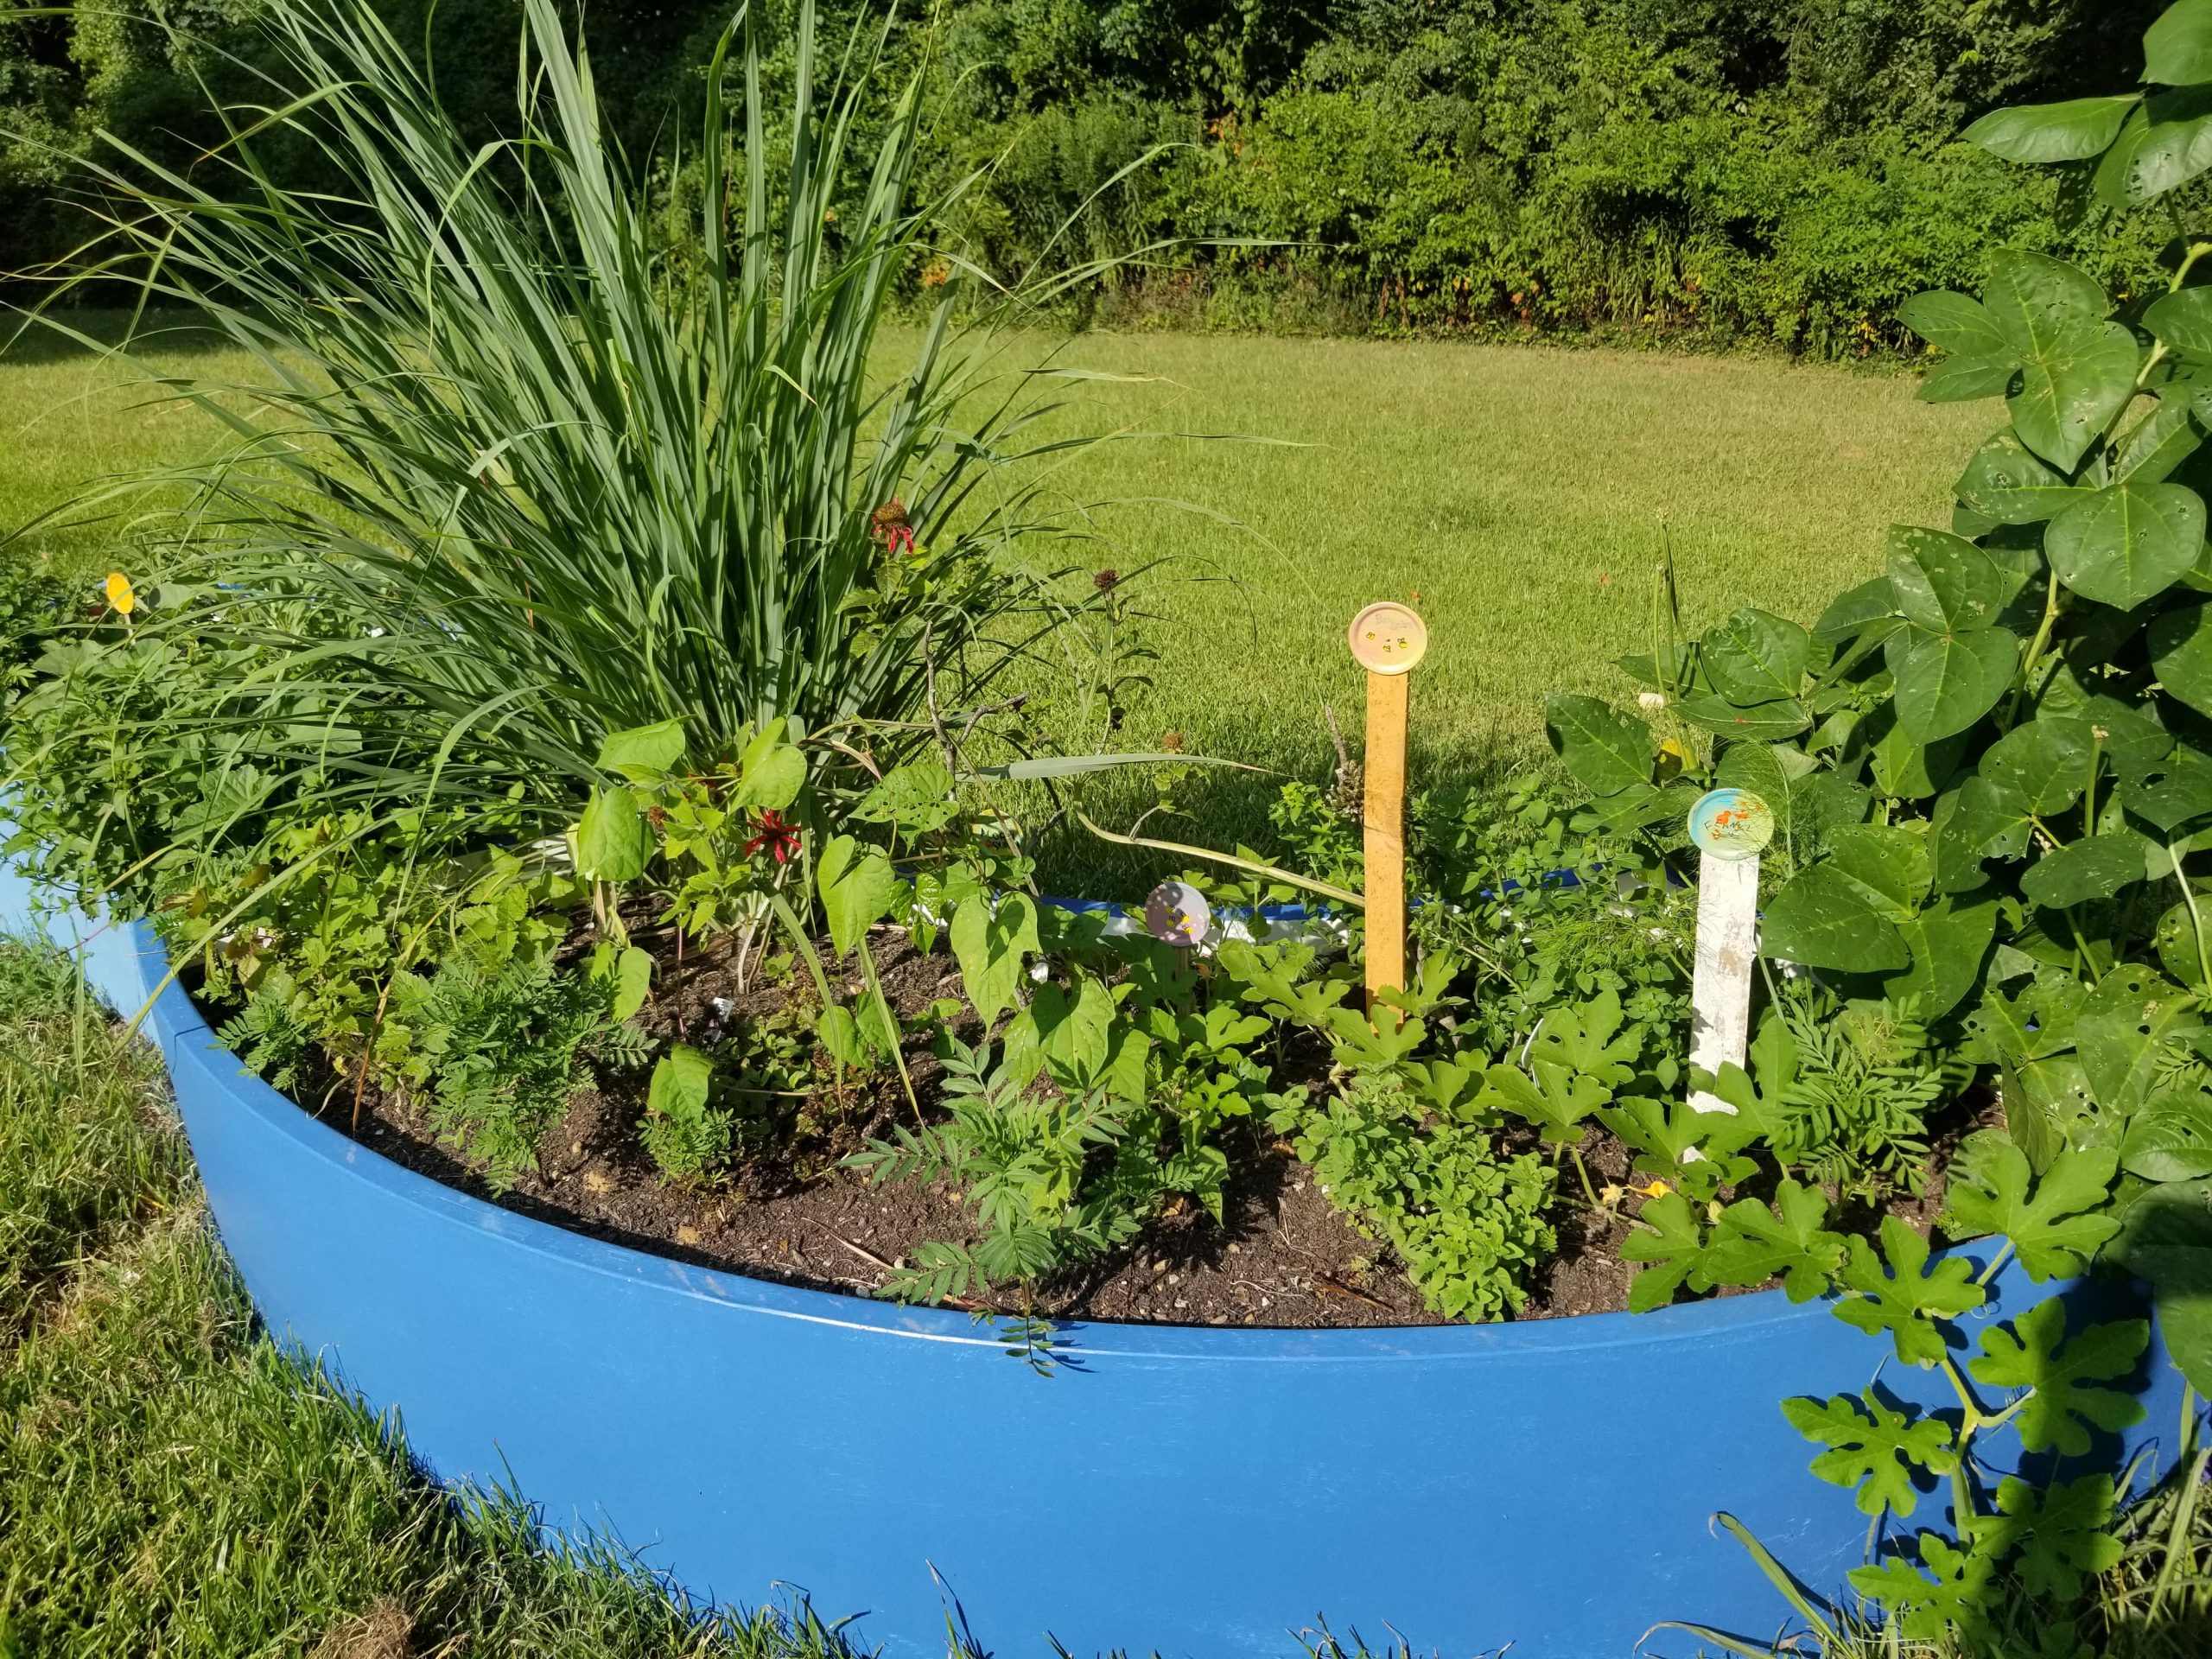 HERB SPIRAL AND ART+GARDEN AT ARKWINGS